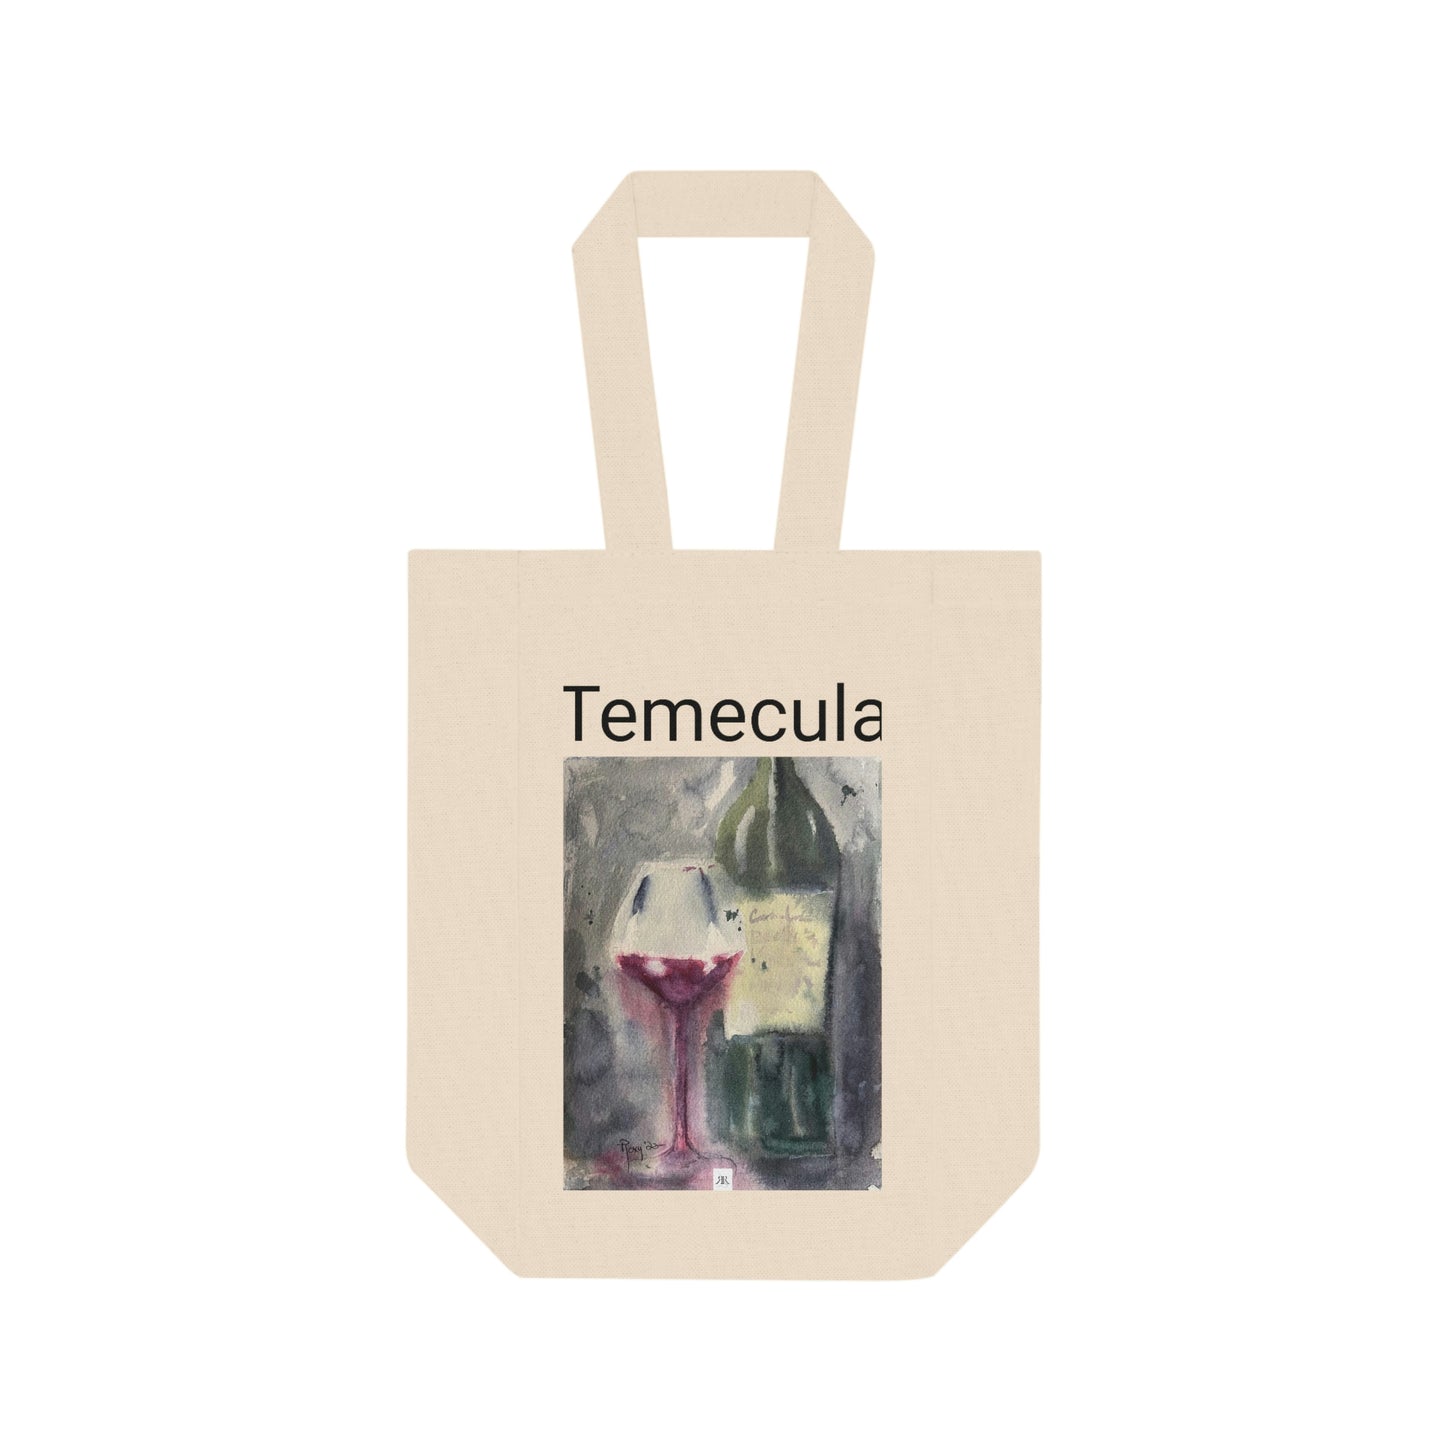 Temecula Double Wine Tote Bag featuring "Wine and Bottle" painting